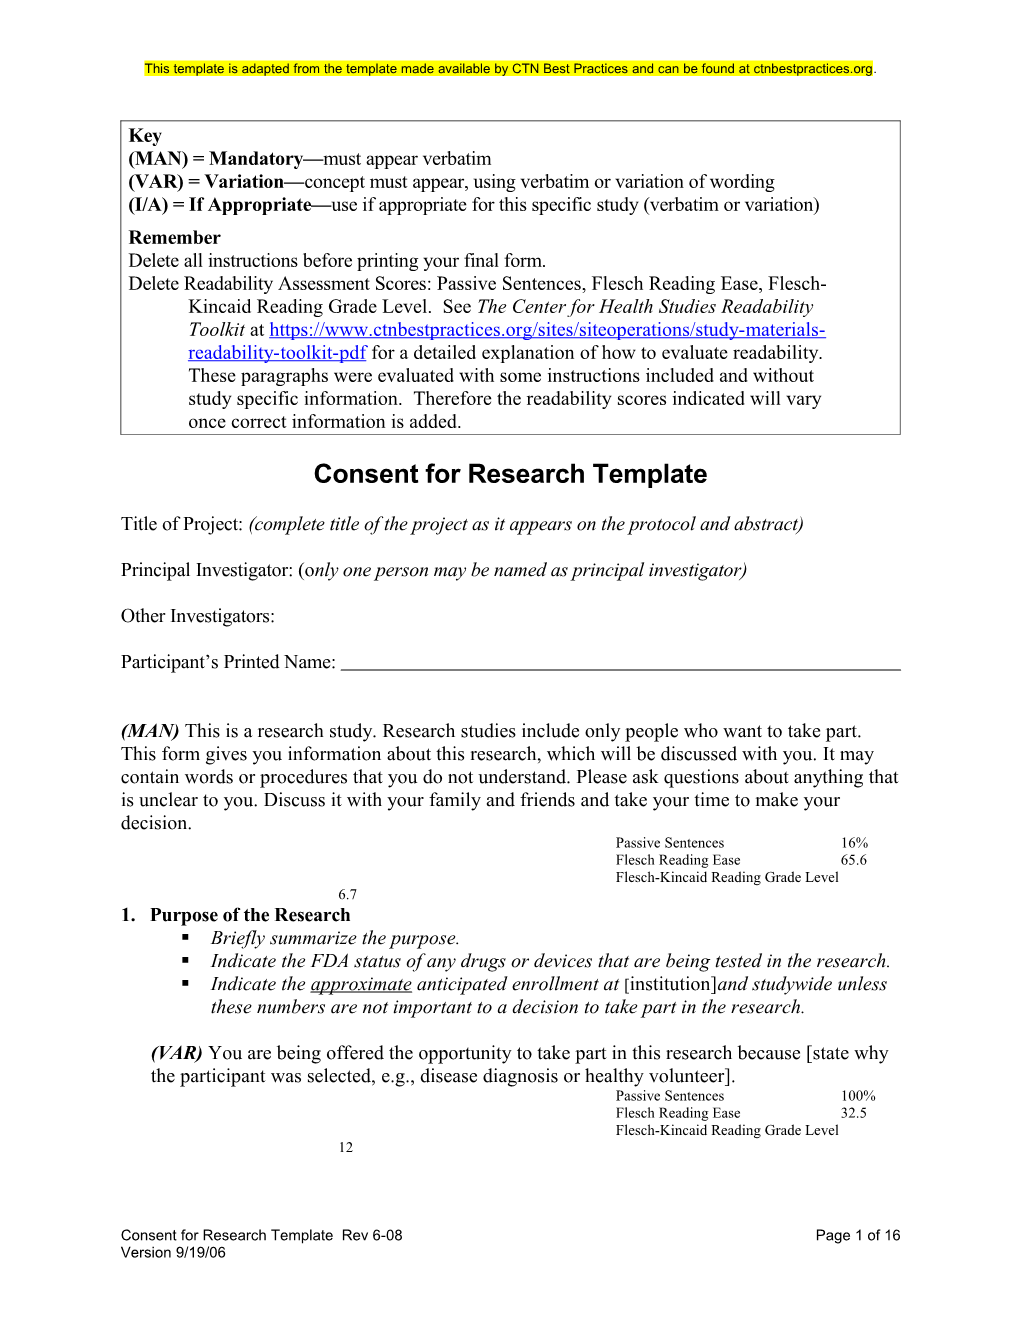 Consent for Research Template